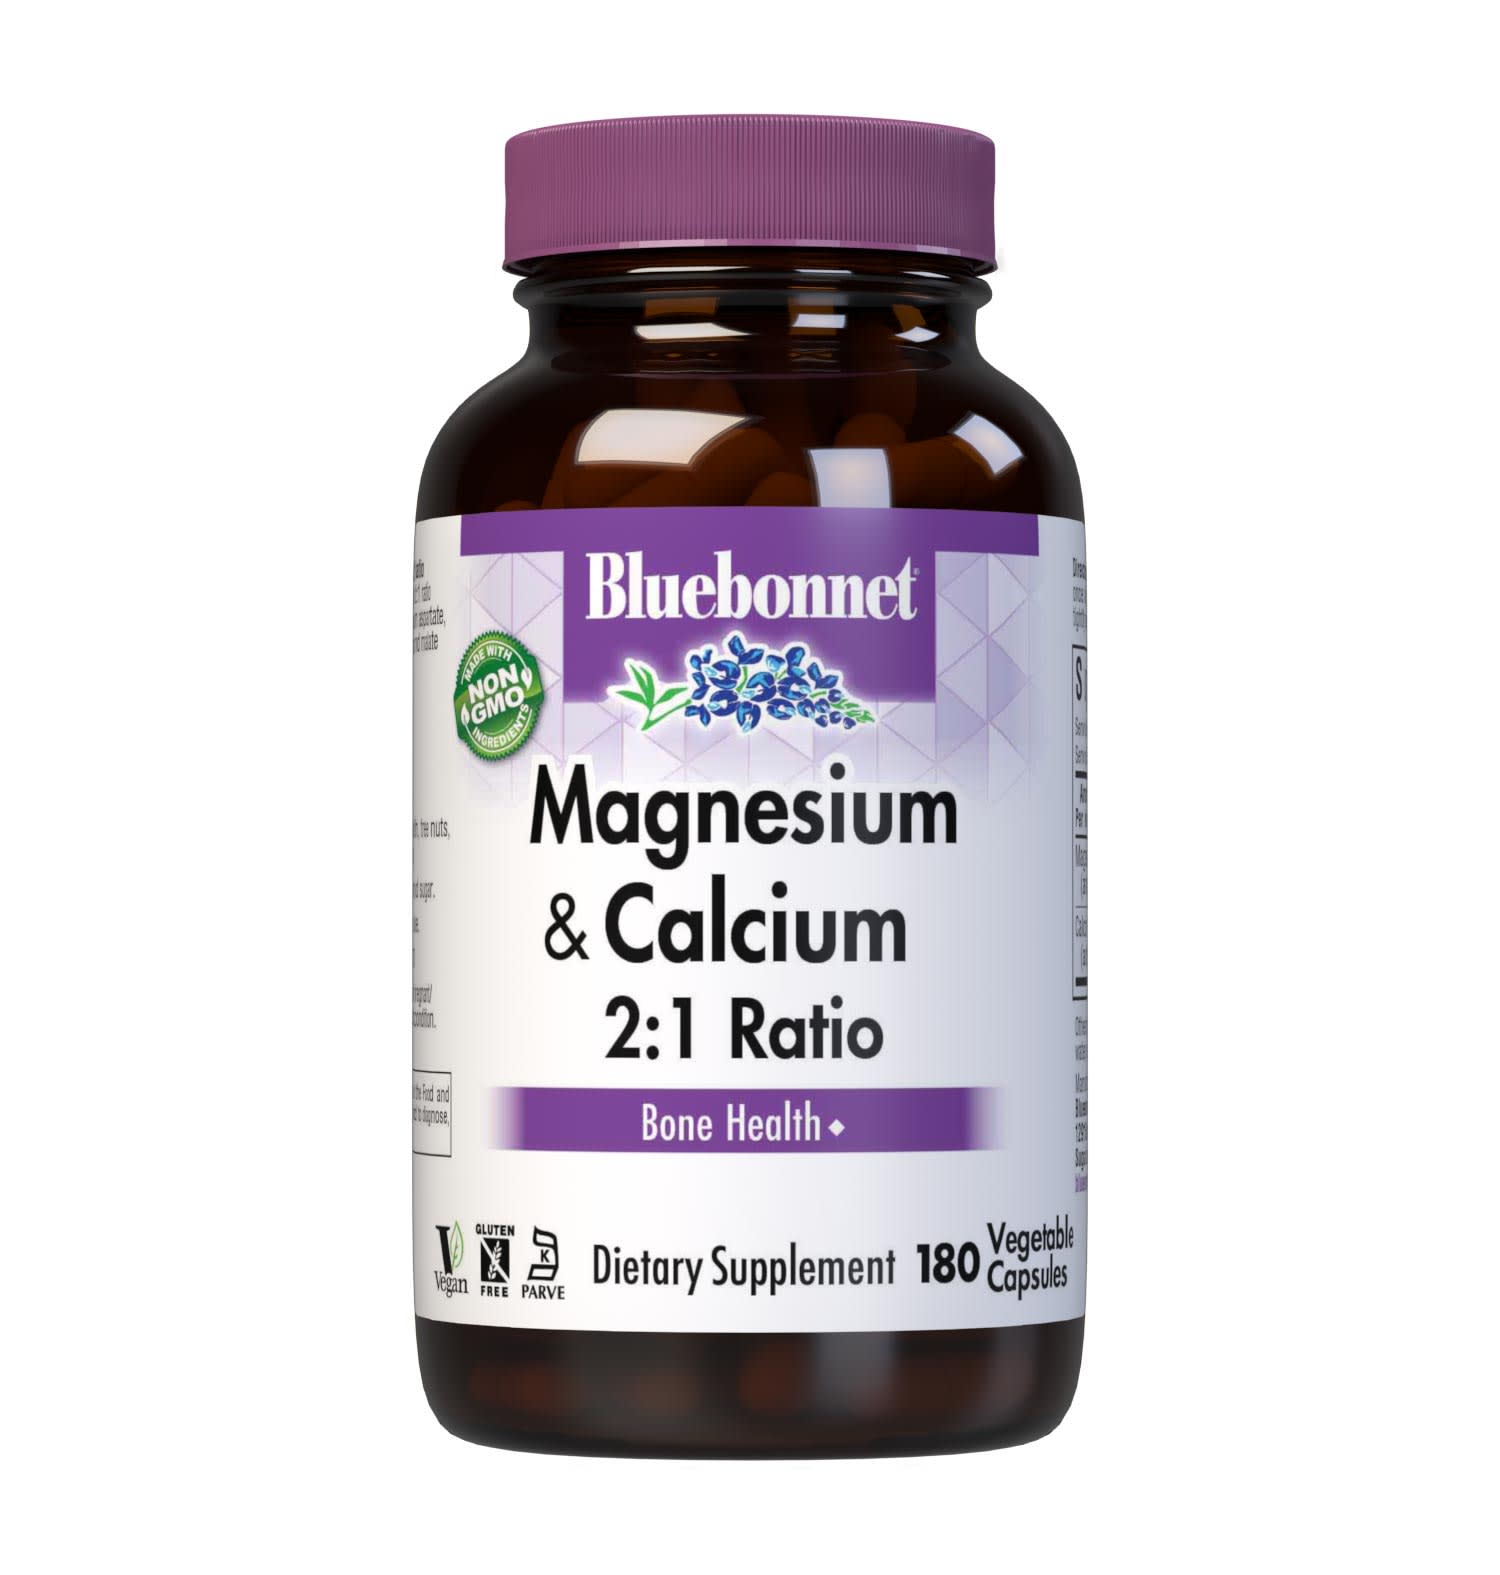 Bluebonnet's Magnesium & Calcium 2:1 180 Vegetable Capsules are formulated with a 2:1 ratio of magnesium from fully reacted magnesium aspartate, plus calcium in a chelate of calcium citrate and malate. #size_180 count